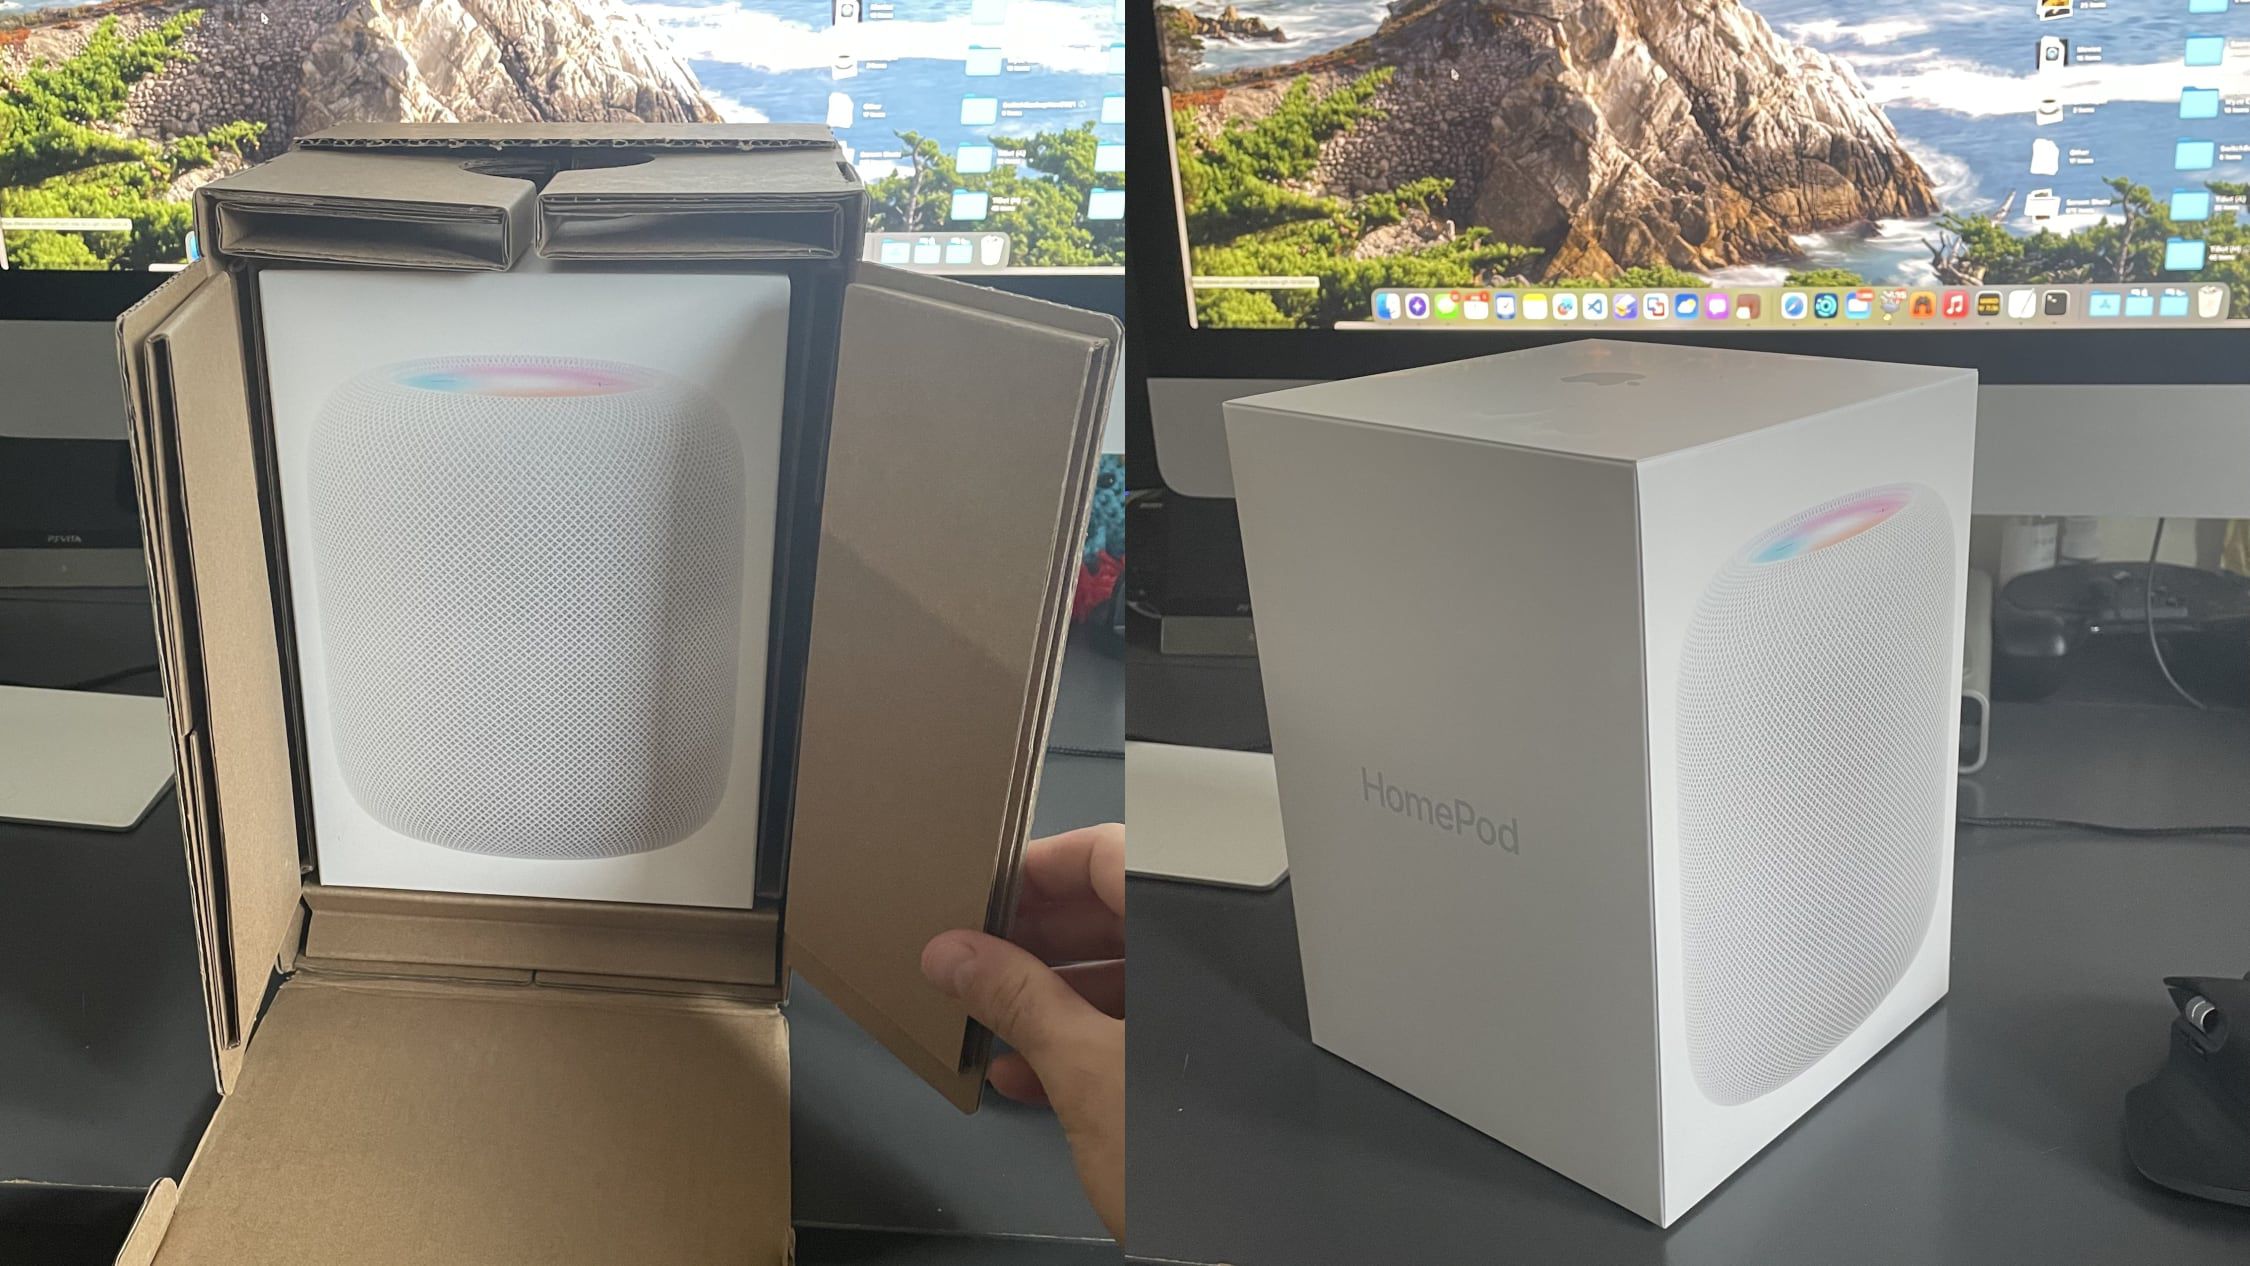 The new HomePod was delivered to a lucky customer two days ago